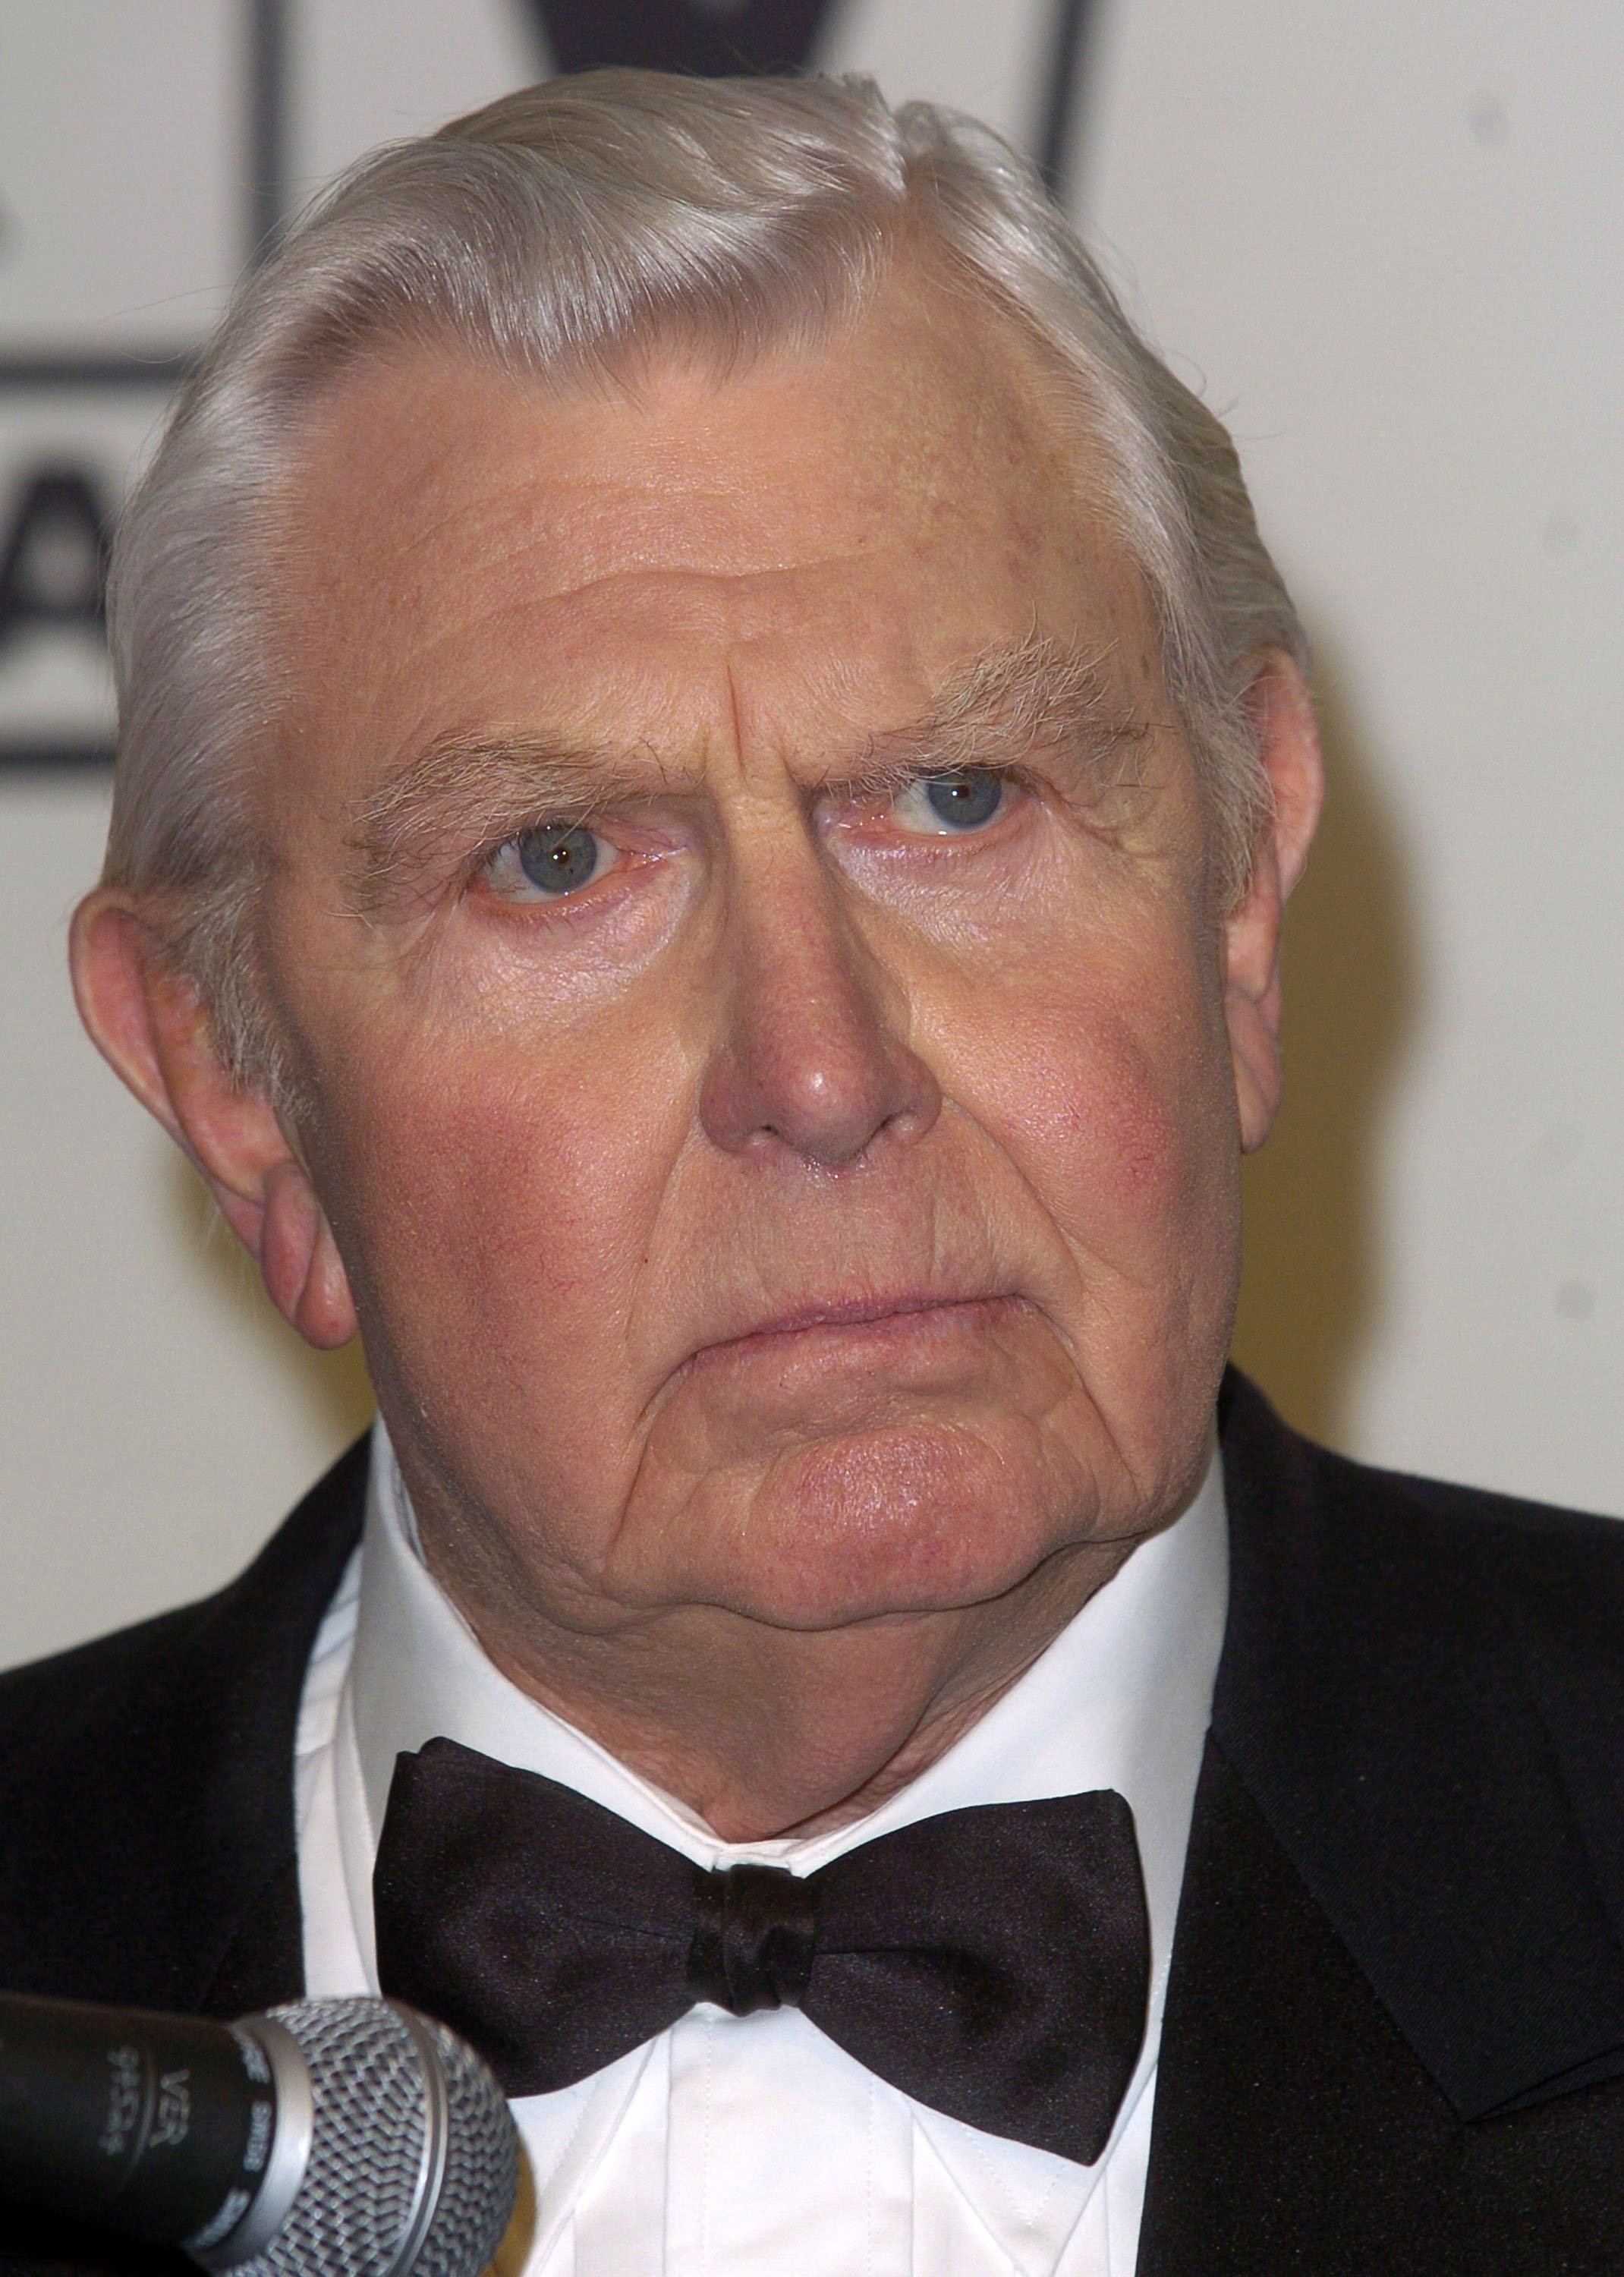 Andy Griffith, winner of the Legend Award for "The Andy Griffith Show" at the 2nd Annual TV Land Awards in 2004 | Source: Getty Images